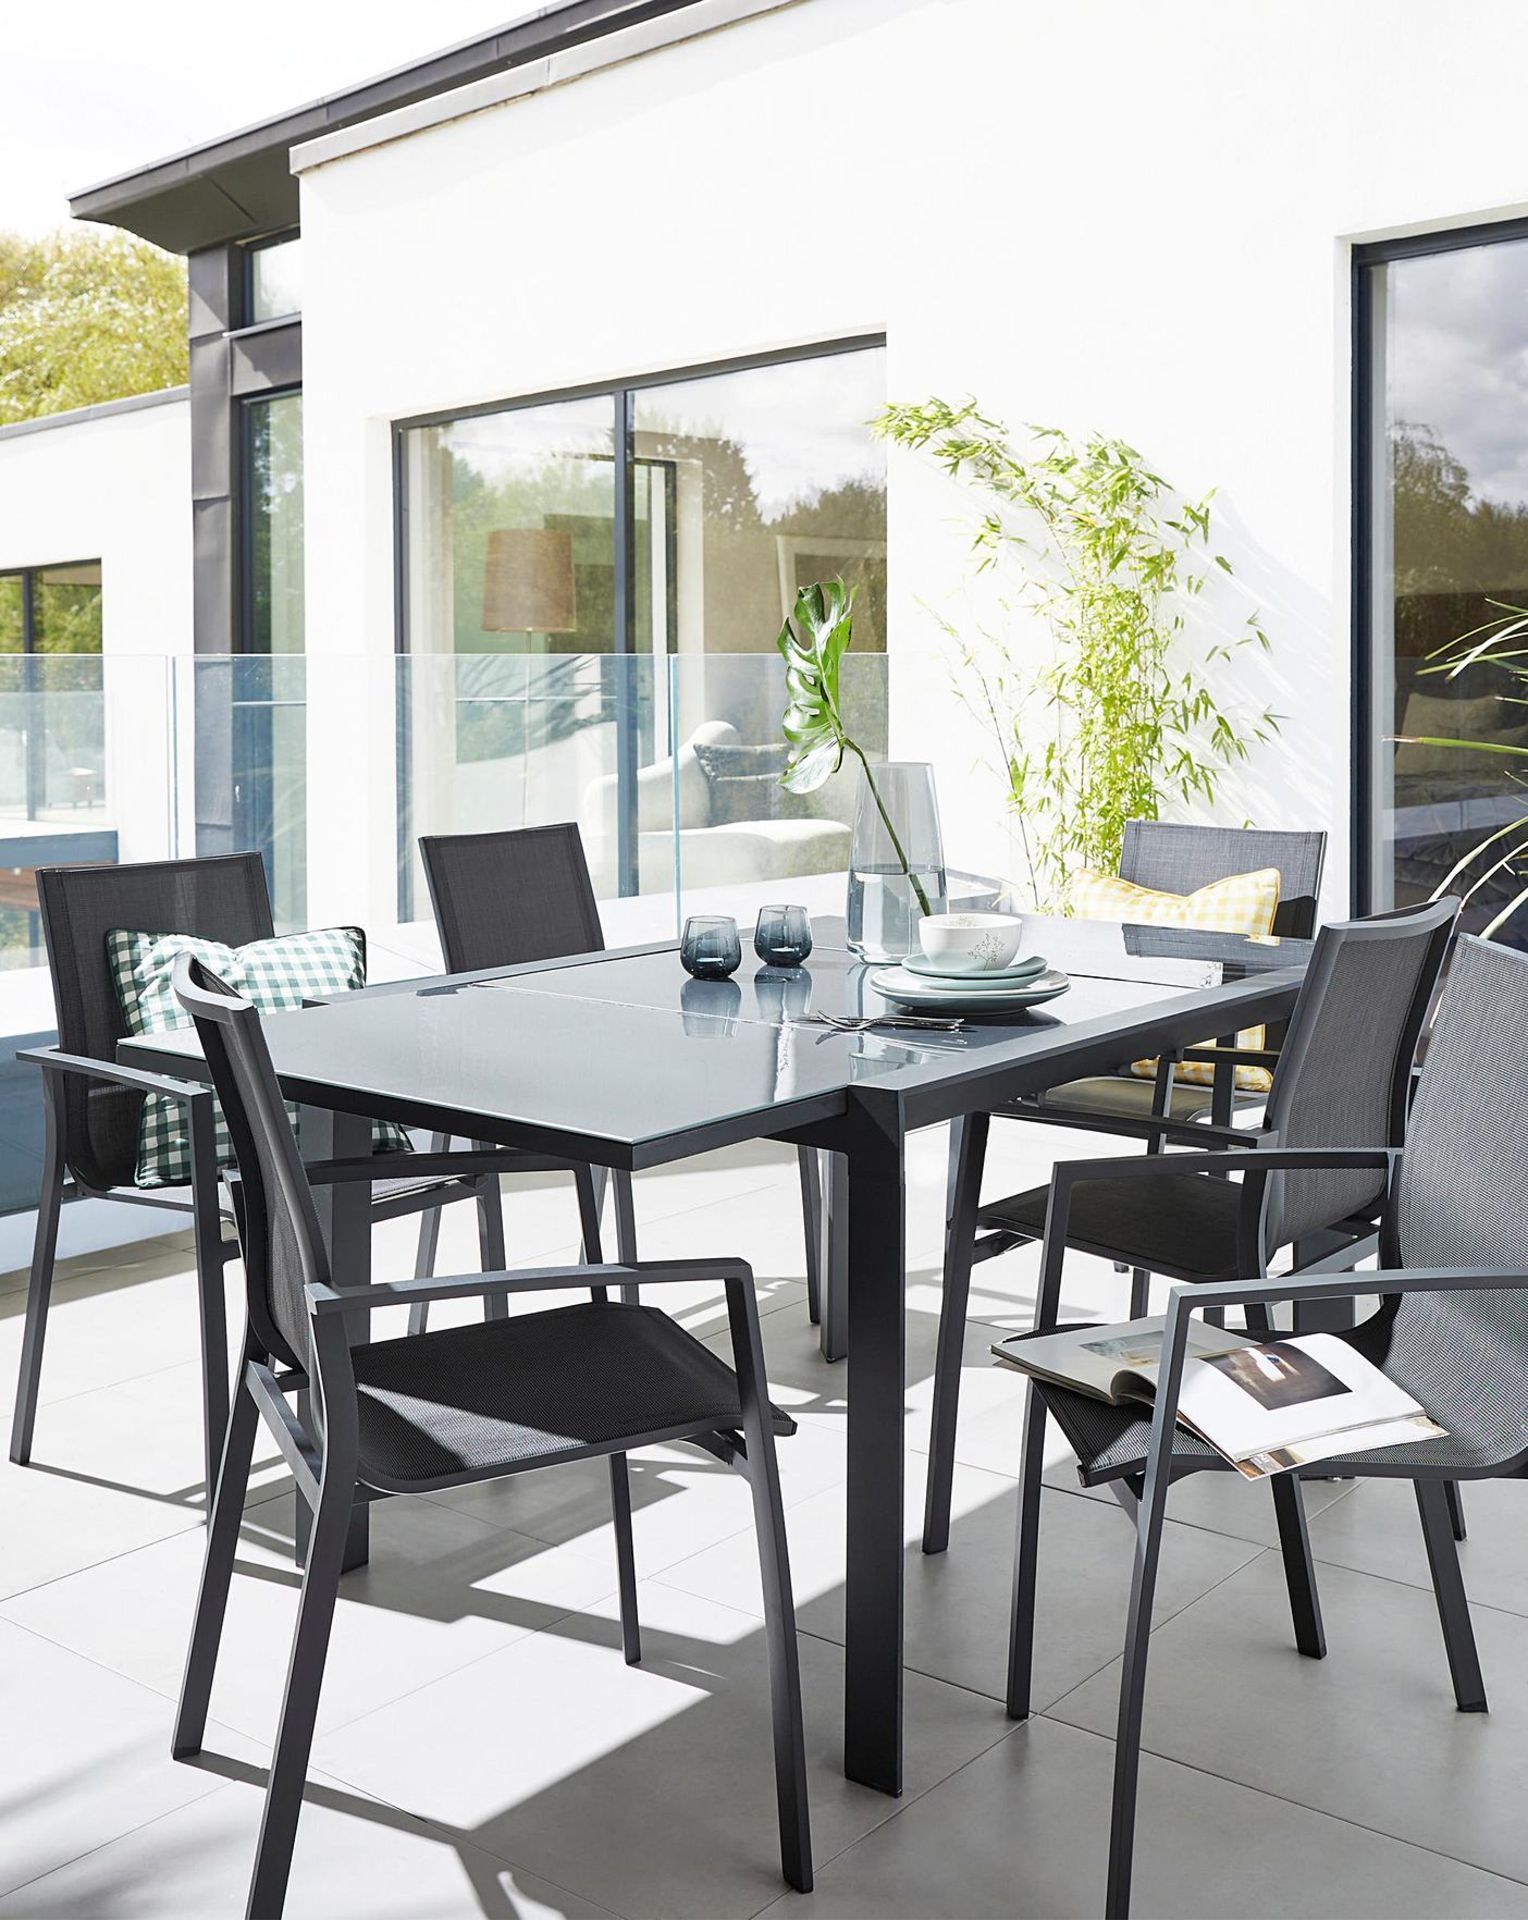 BRAND NEW Oslo 6 Seater Dining Set with Extendable Table. RRP £699 EACH. The Oslo Dining Set with